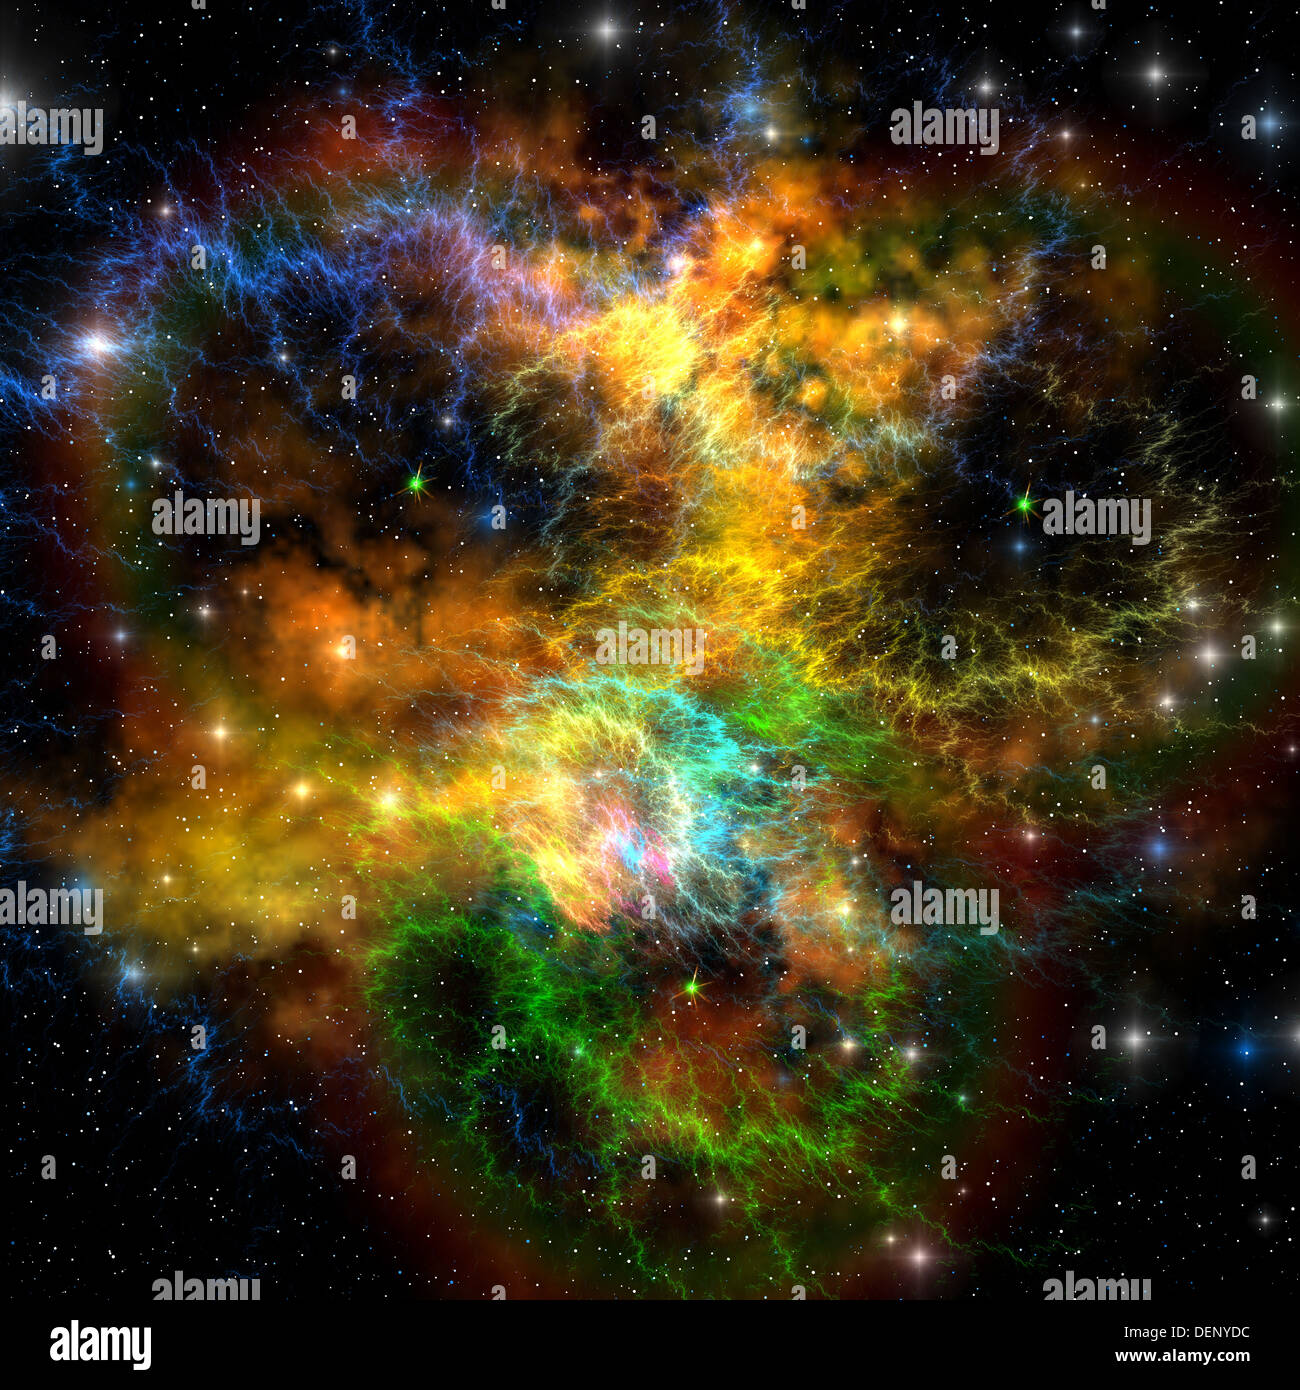 Multi-colored ribbons and gaseous clouds make up this nebula in the cosmos. Stock Photo